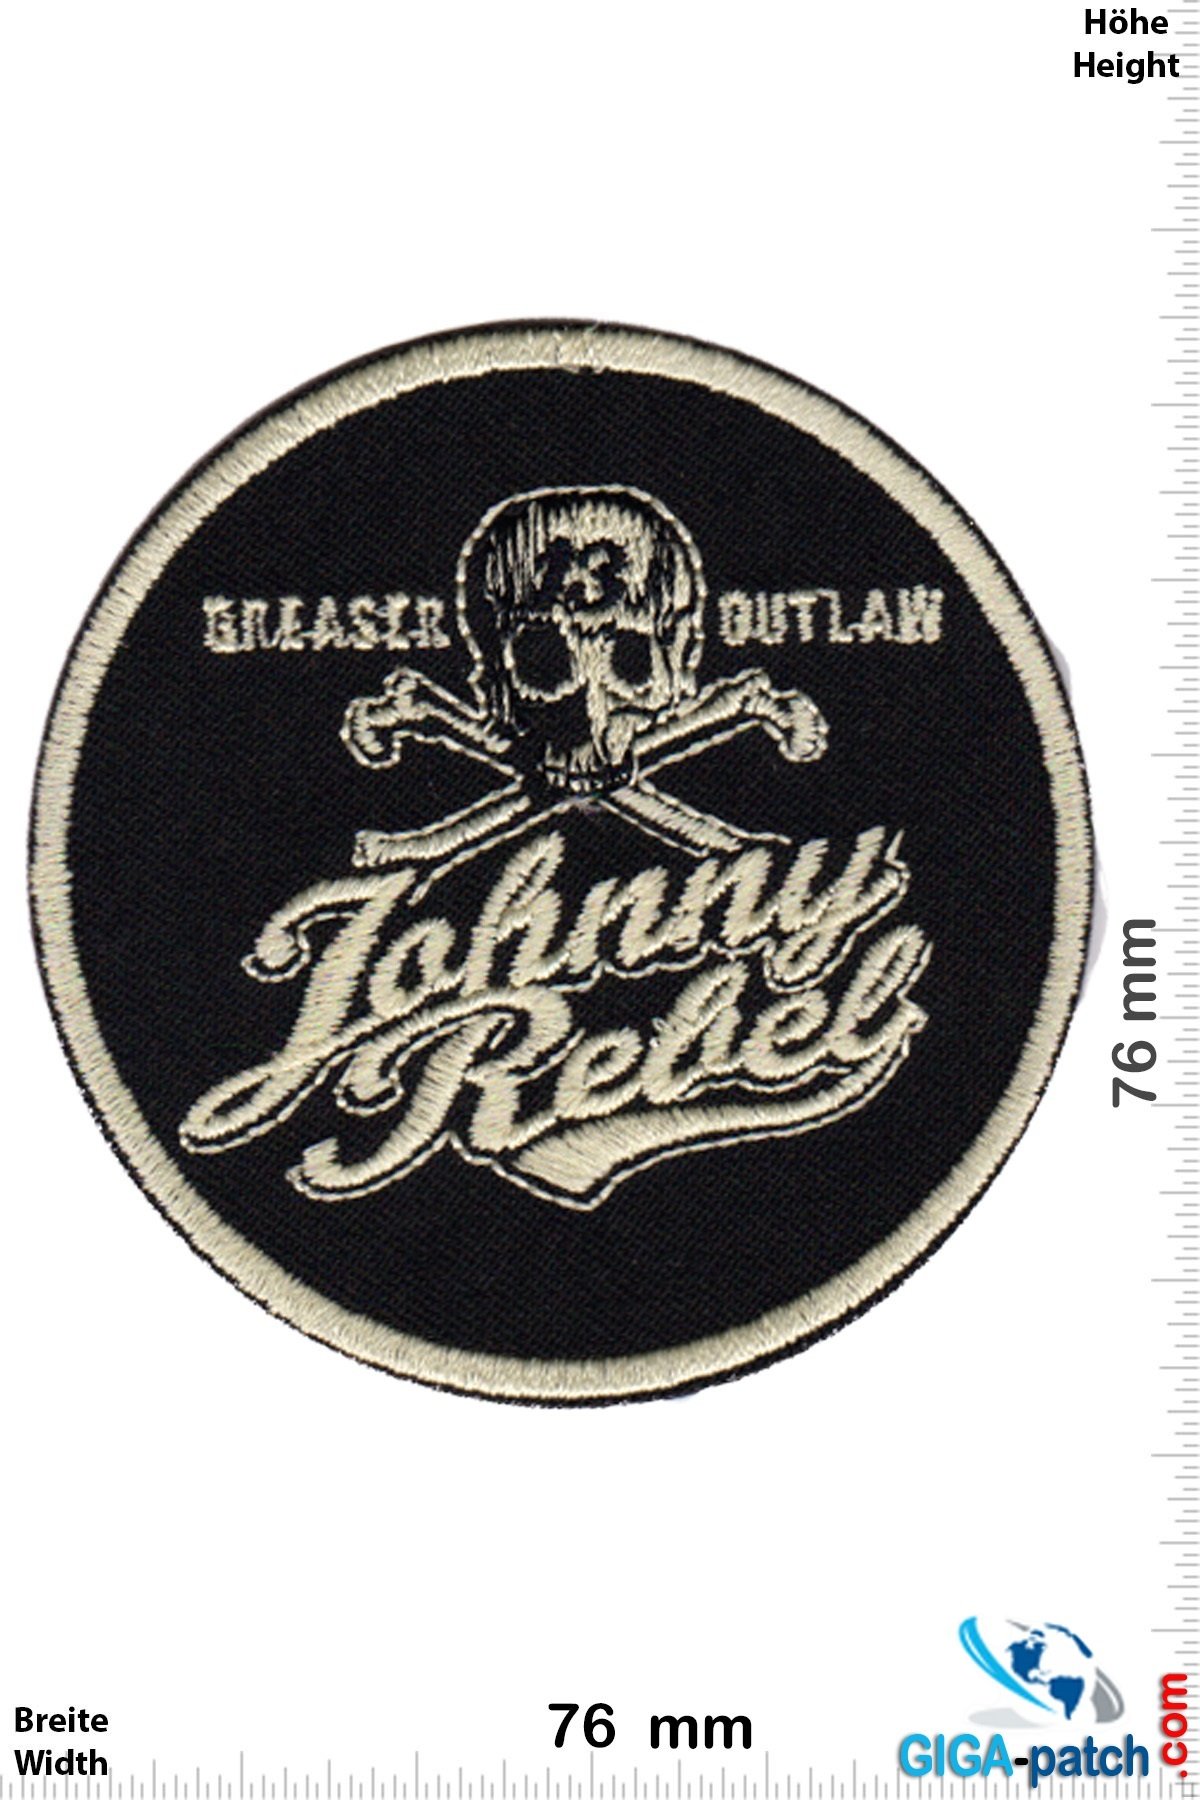 Hotrod - Johnny Rebel - Greaser Outlaw - Lucky 13- Patch - Back Patches ...